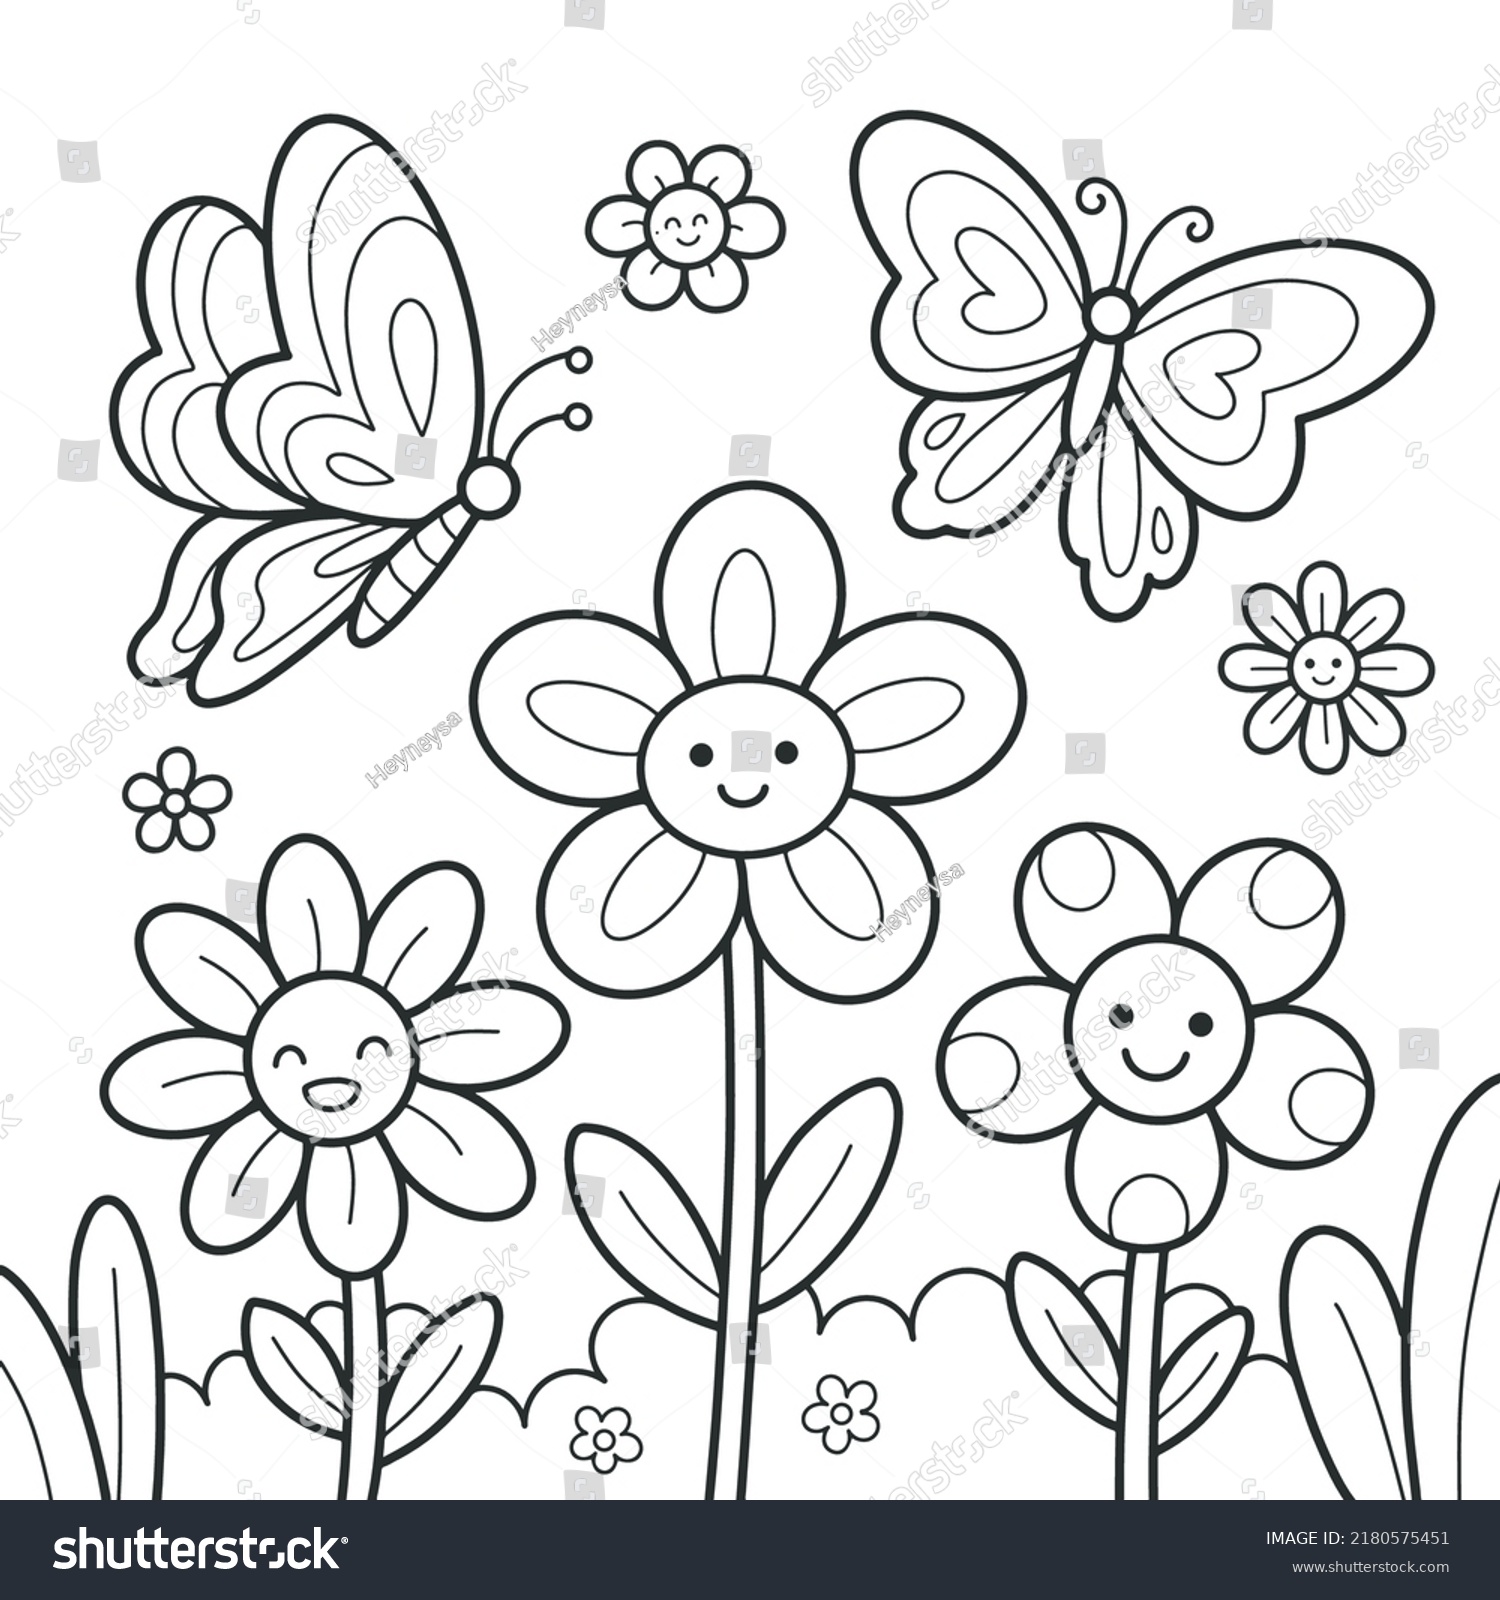 Thousand coloring pages butterfly royalty